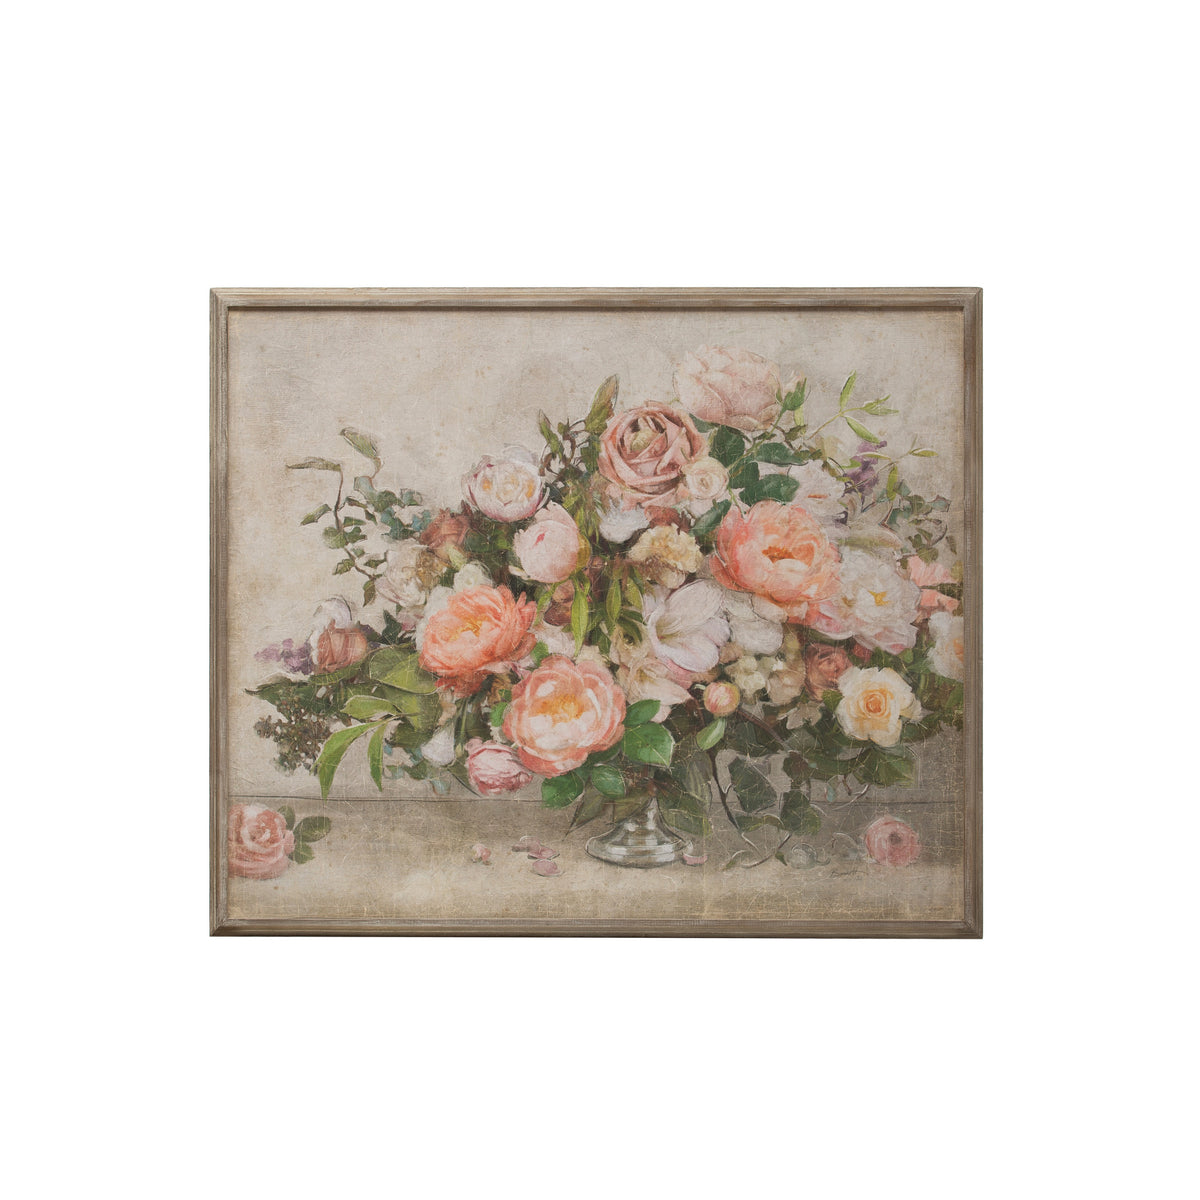 Wood Framed Wall Decor with Flower Bouquet